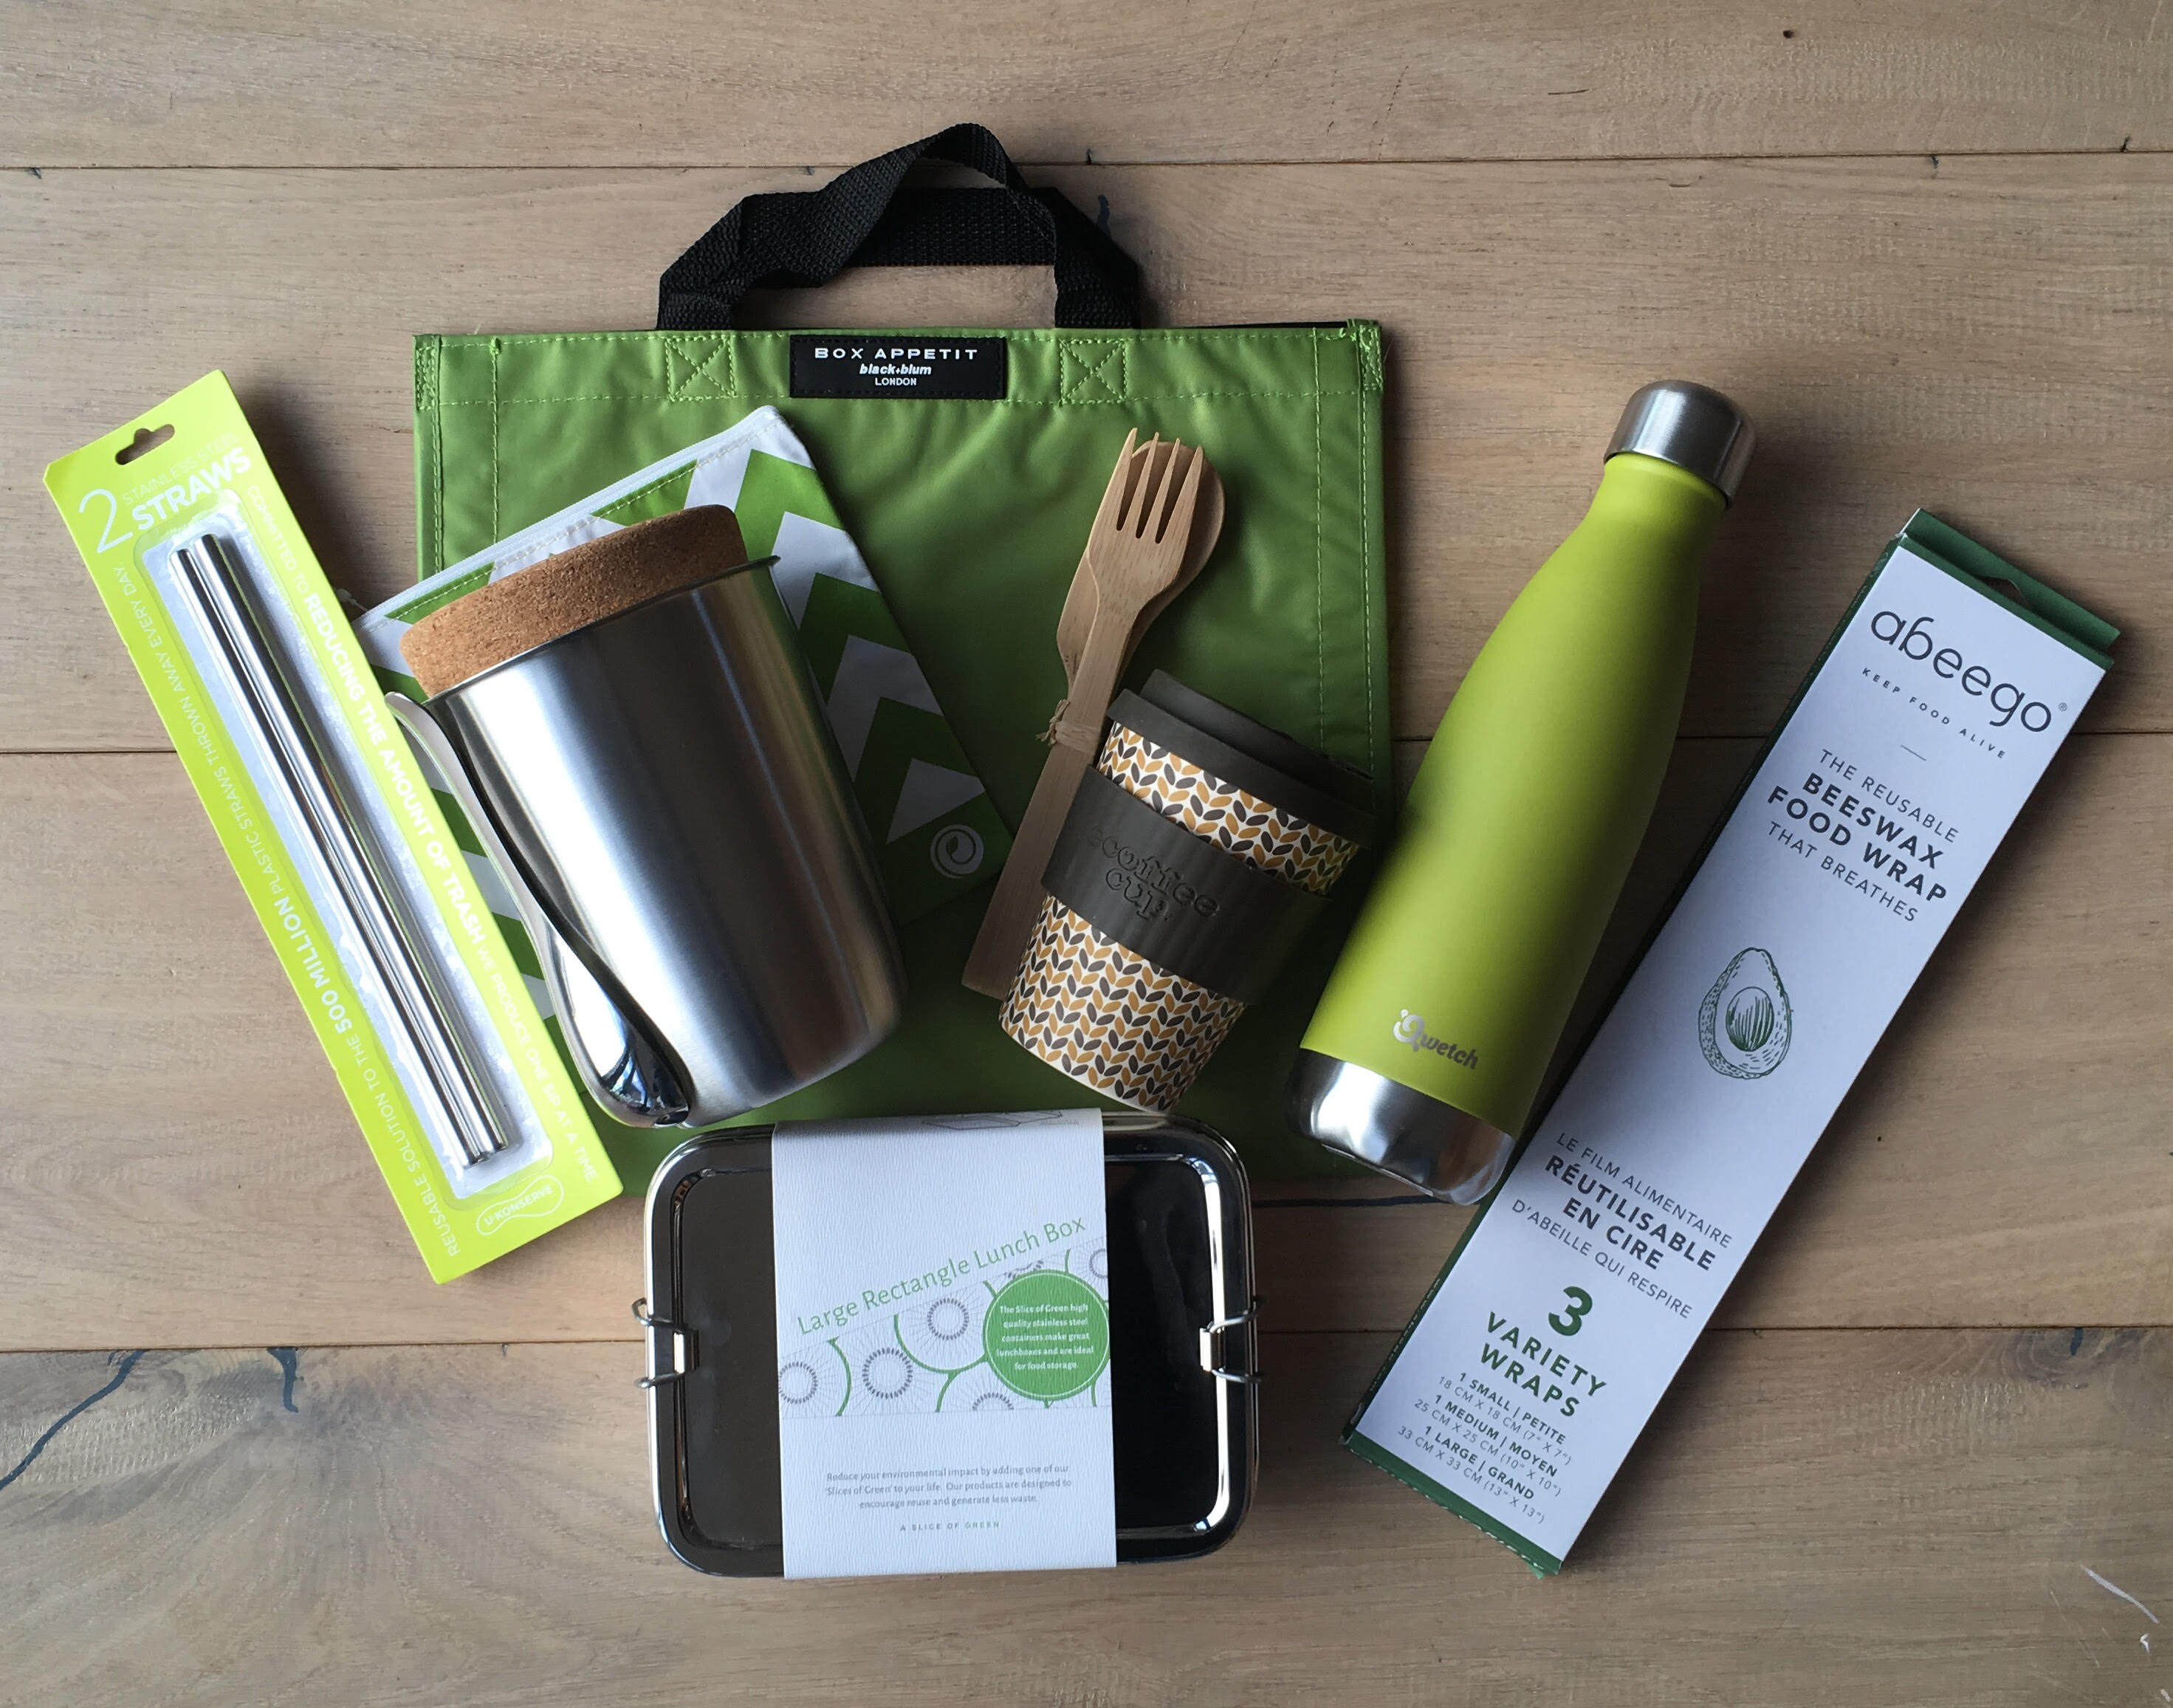 200+ Inspiring, Ethical and Eco-Friendly Gifts in Inhabitat's 2014 Green  Gift Guide